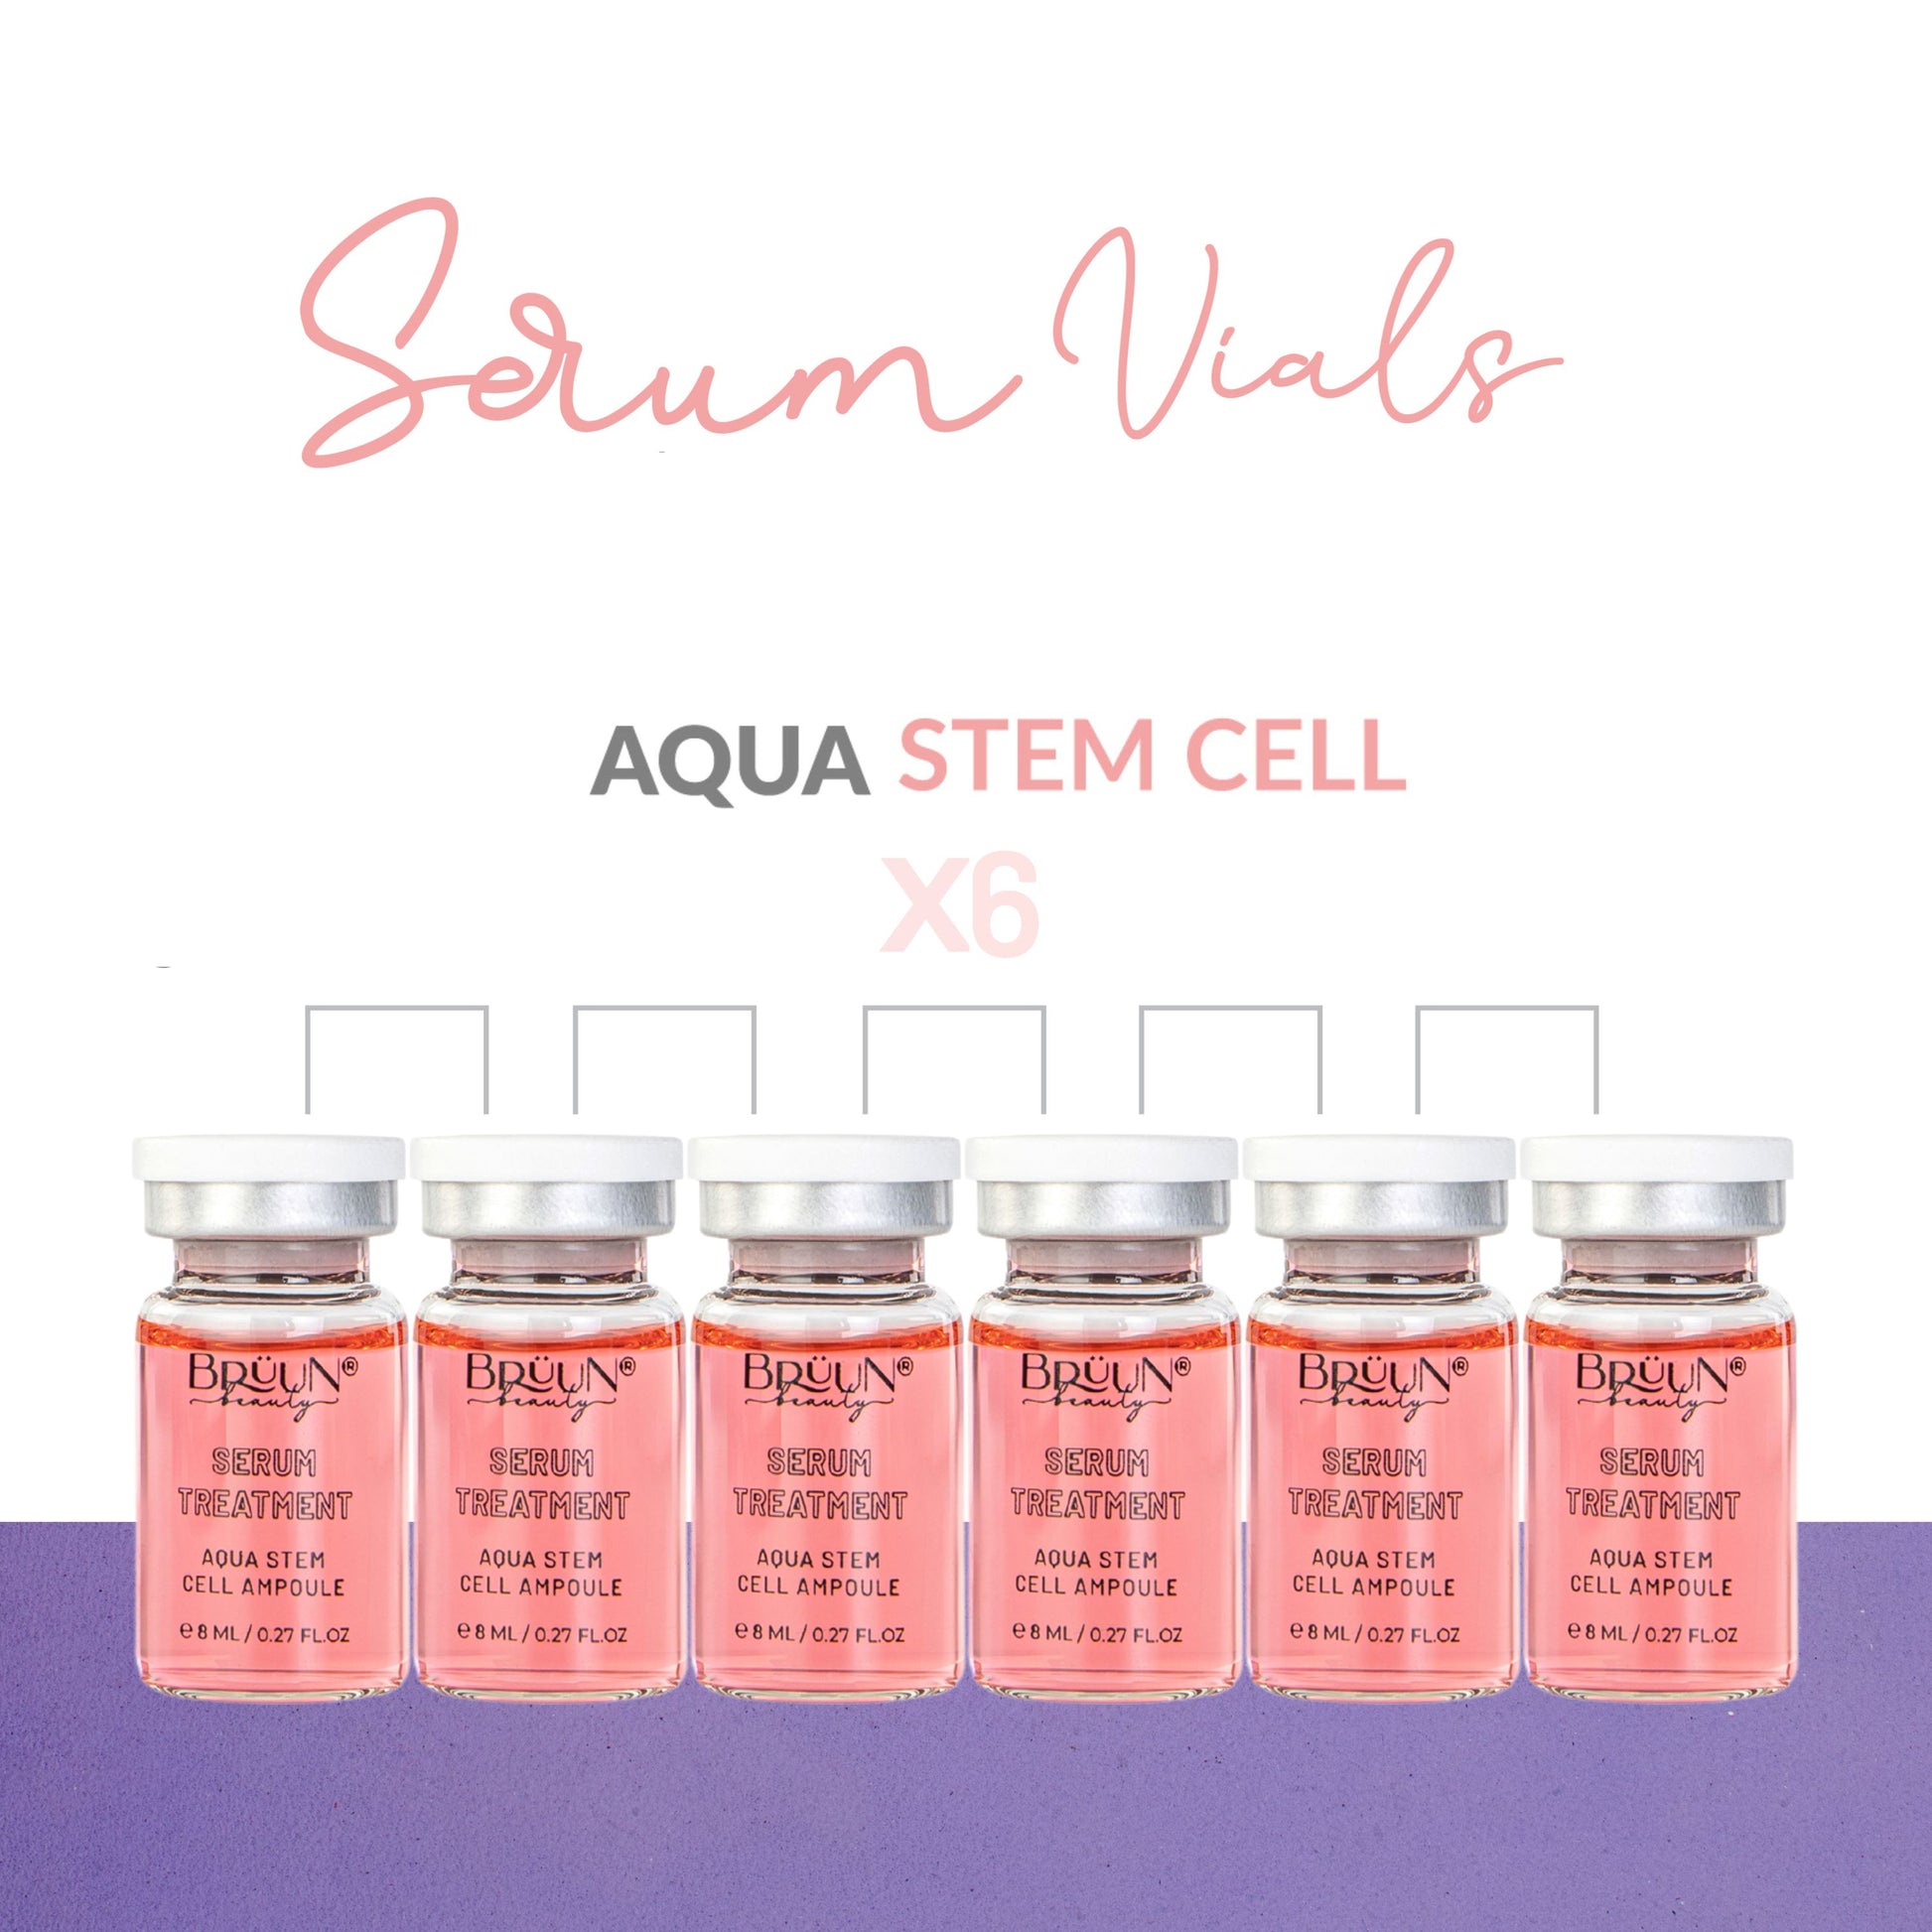 BB Serum Ampule – A (Pack of 6) Aqua Stem cell Ampoule for Moisturizing Dry skin Bruun Beauty 